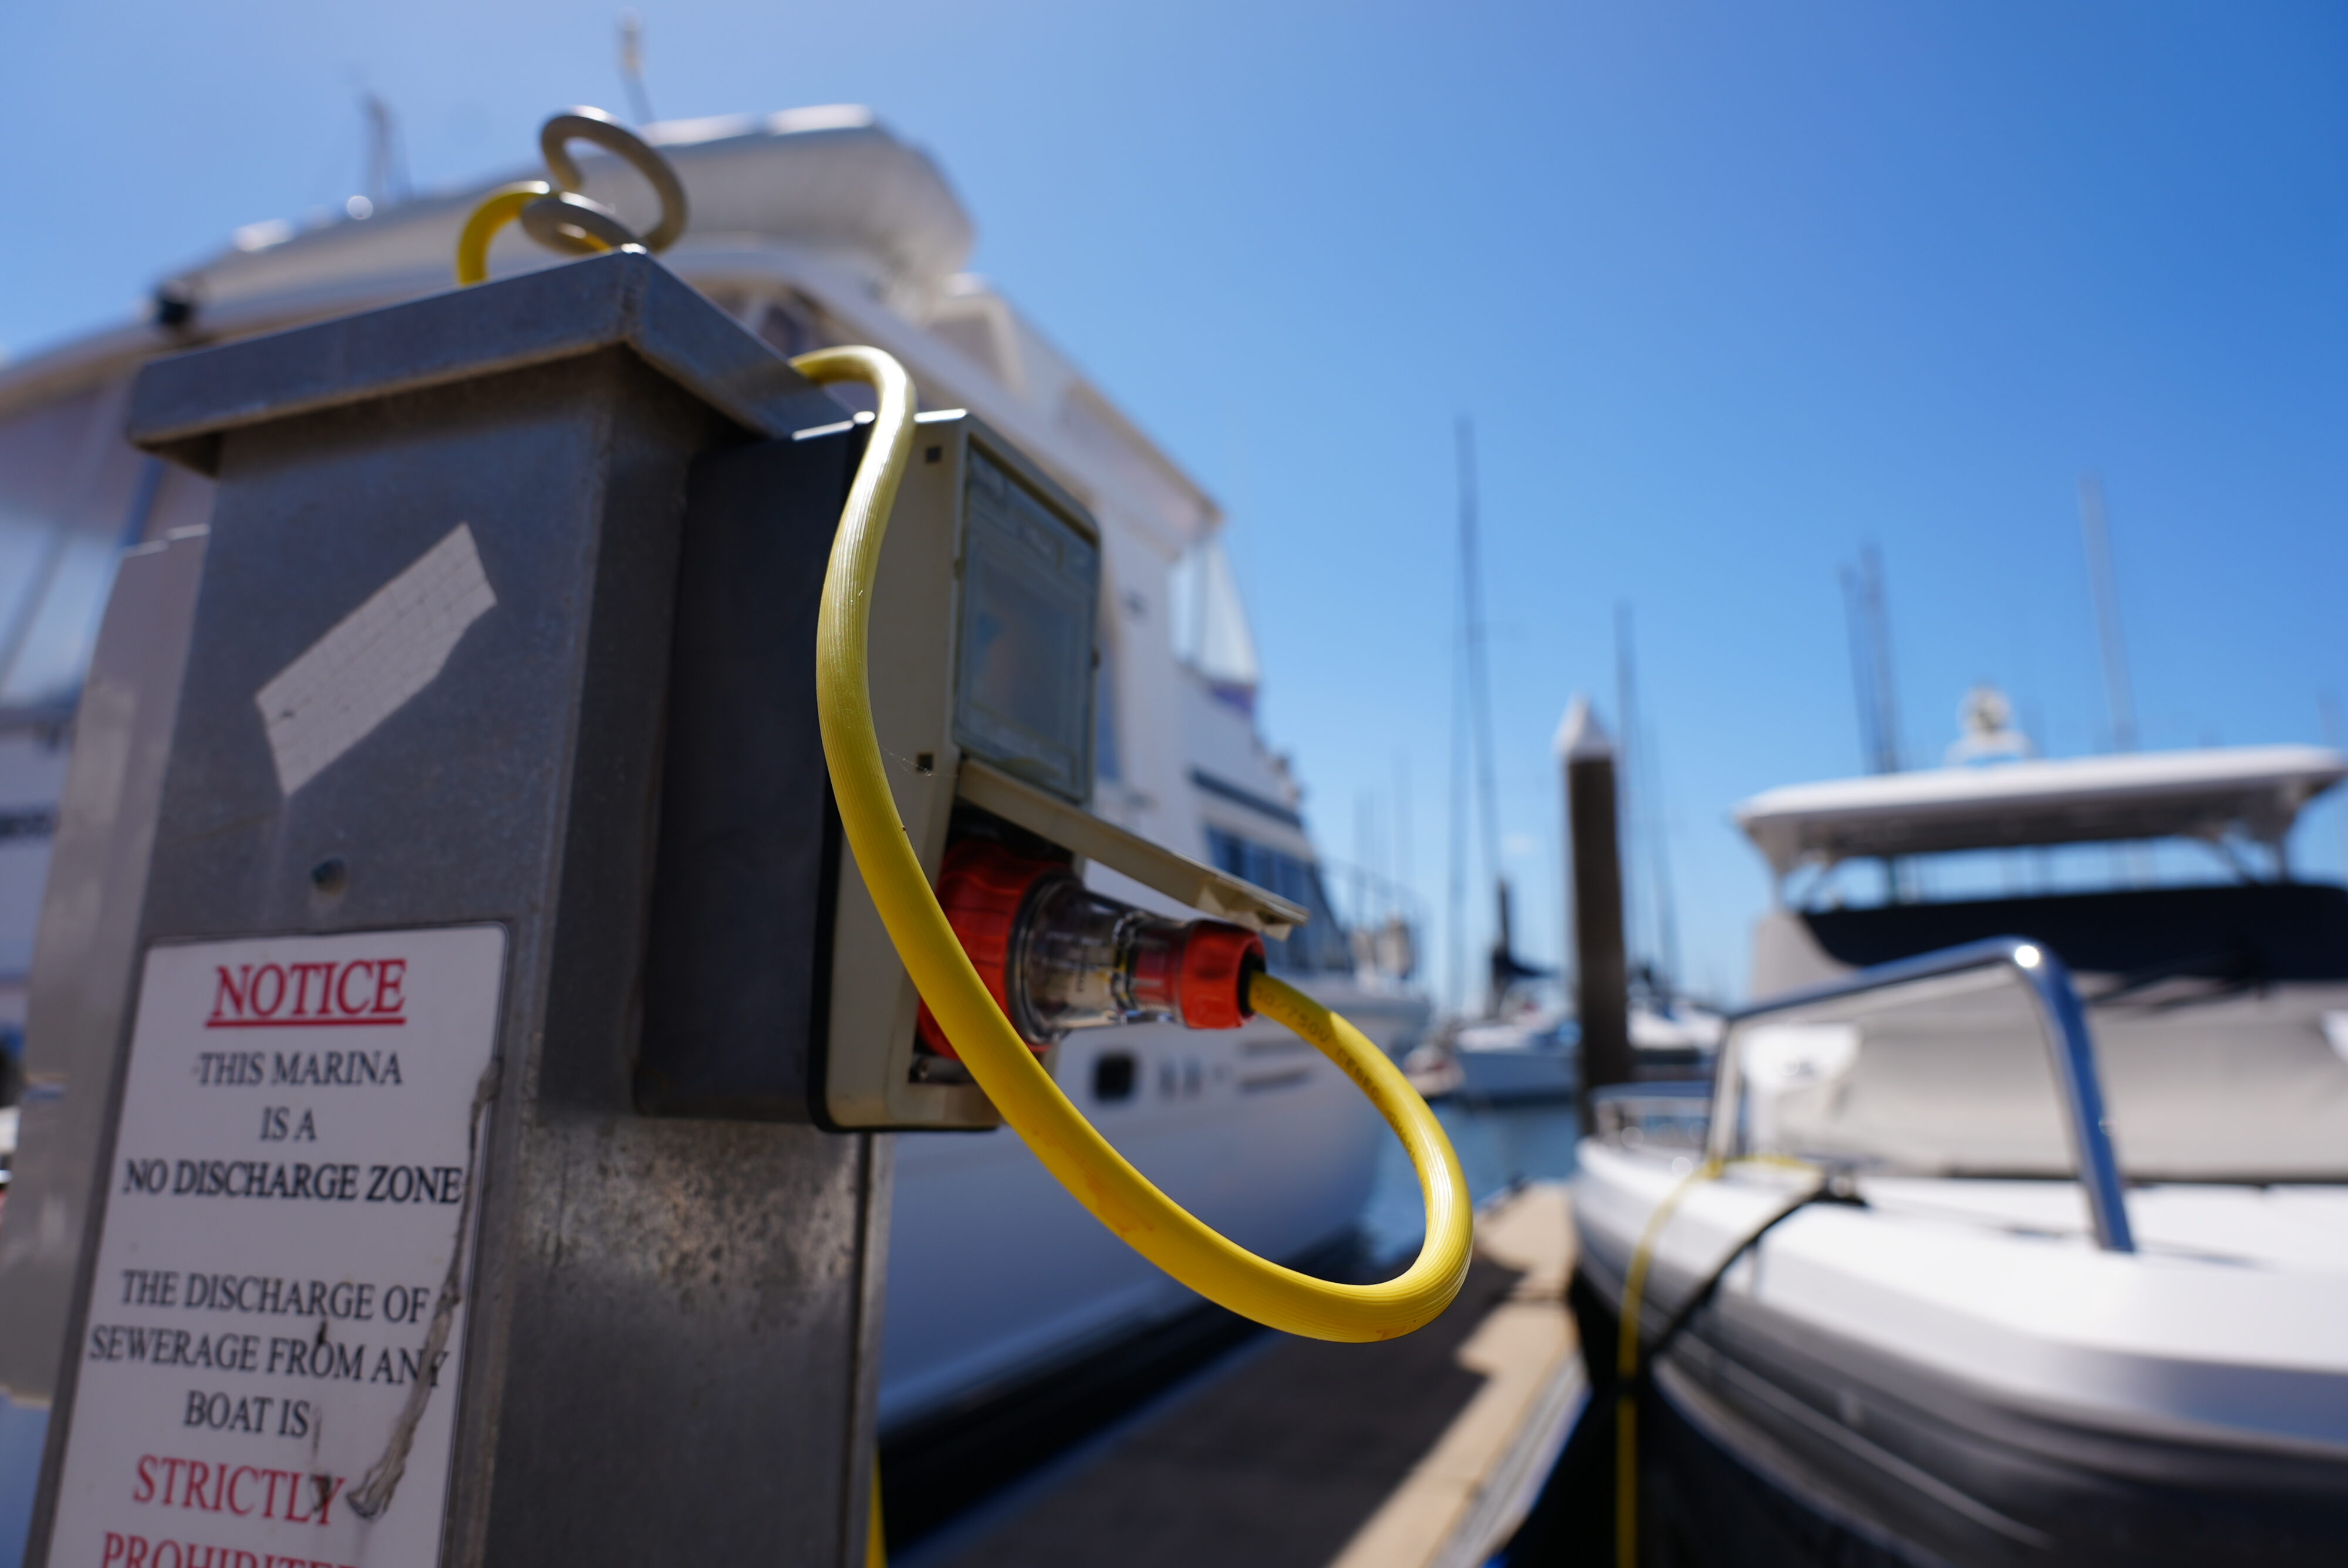 Image showing marina electrical connection